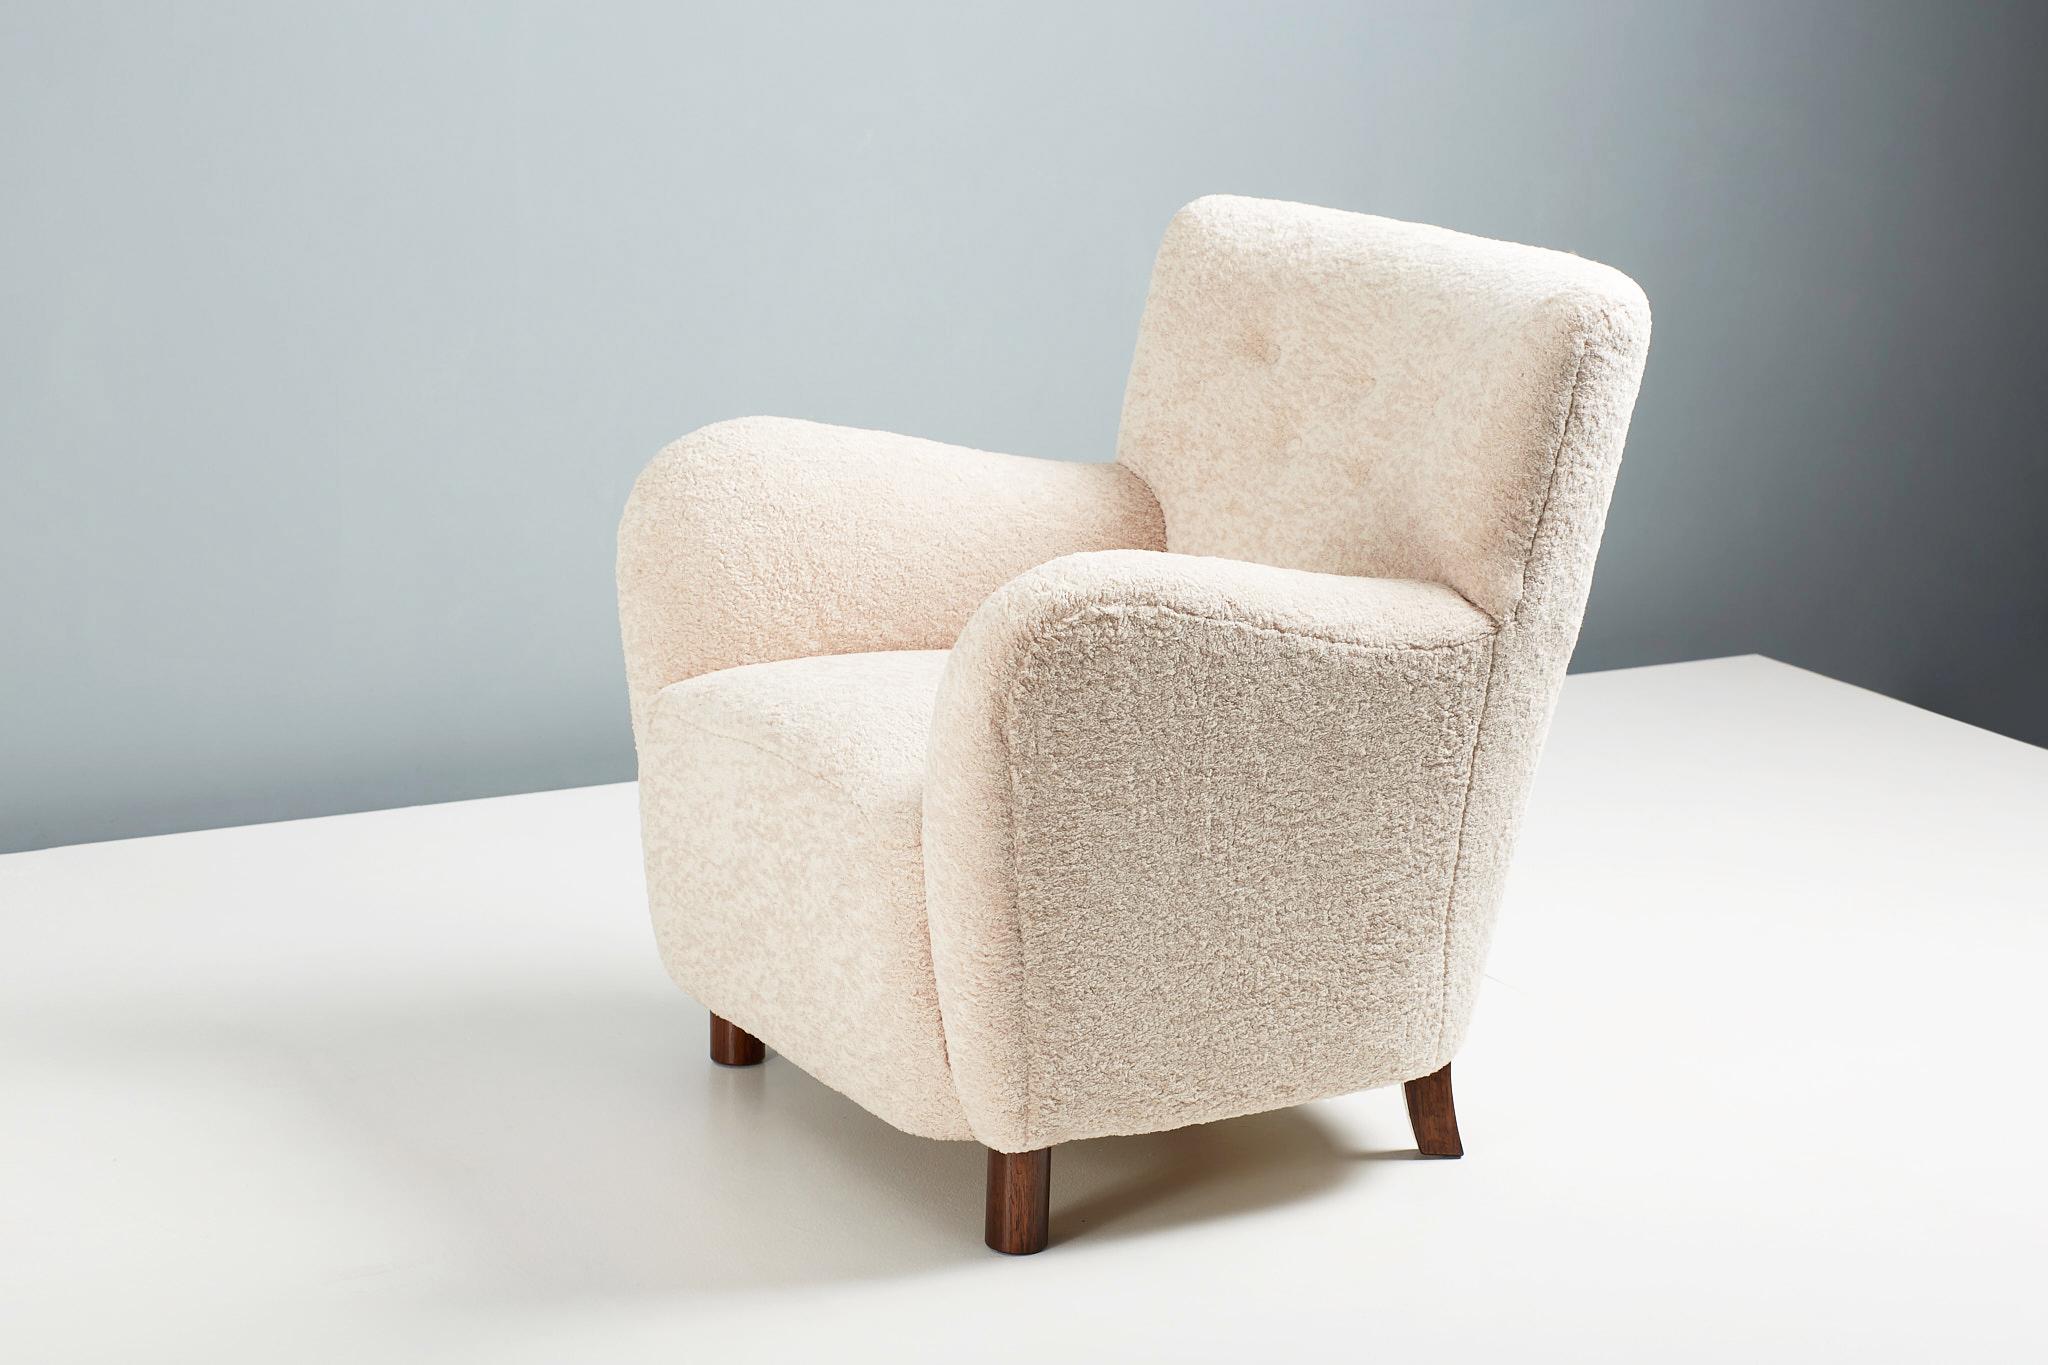 Dagmar design - model 54 lounge chair.

A custom made lounge chair developed and hand-made at our workshops in London using the highest quality materials. The 54 chair is available to order in a range of different shearling colors and fabrics with